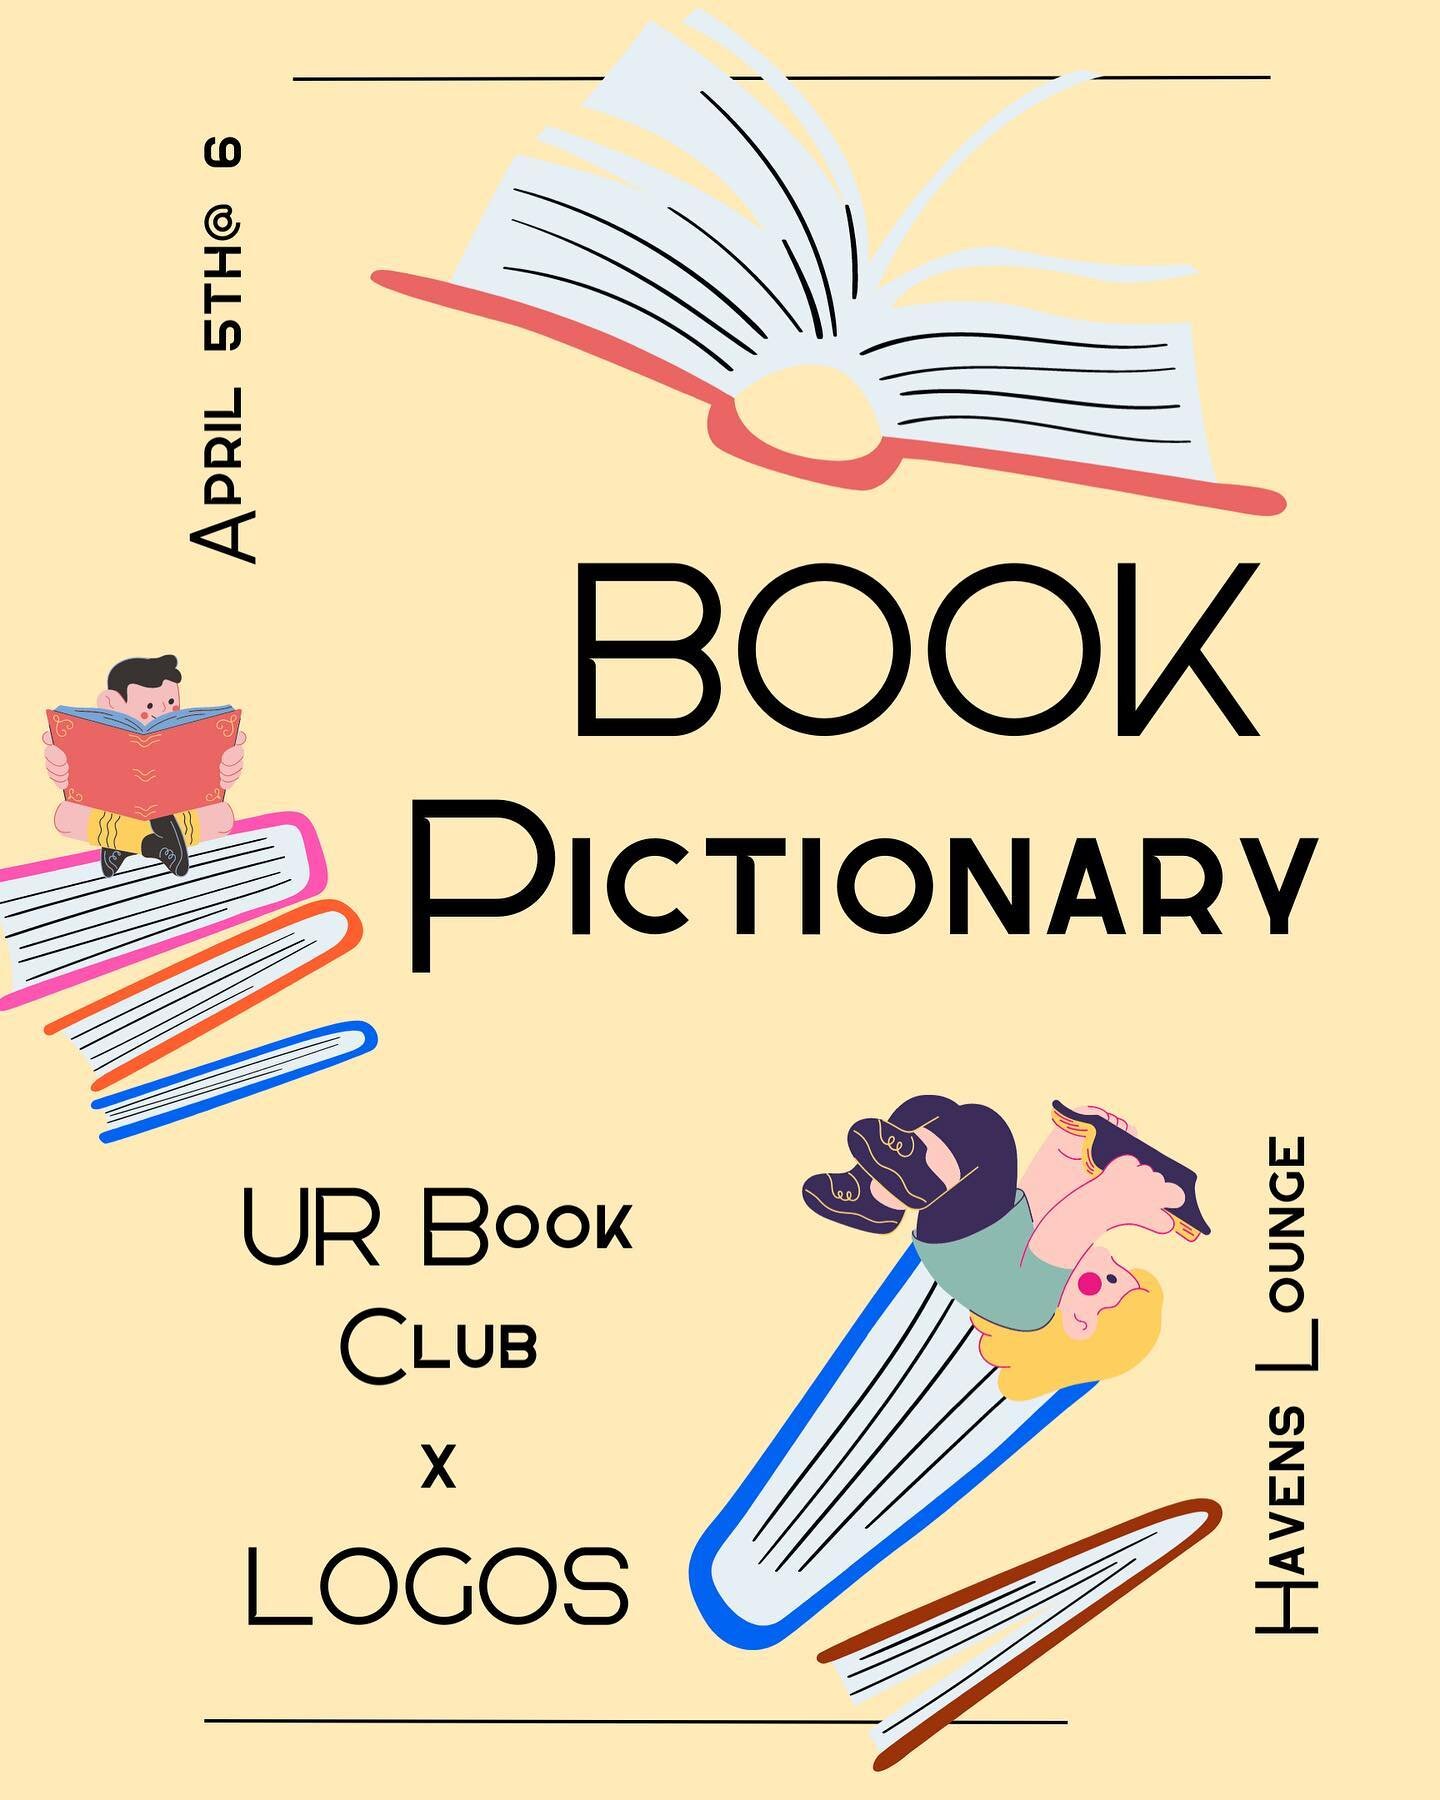 Come join UR Book Club and LOGOS this Wednesday at 6 in the Havens Lounge to play some Book Pictionary!